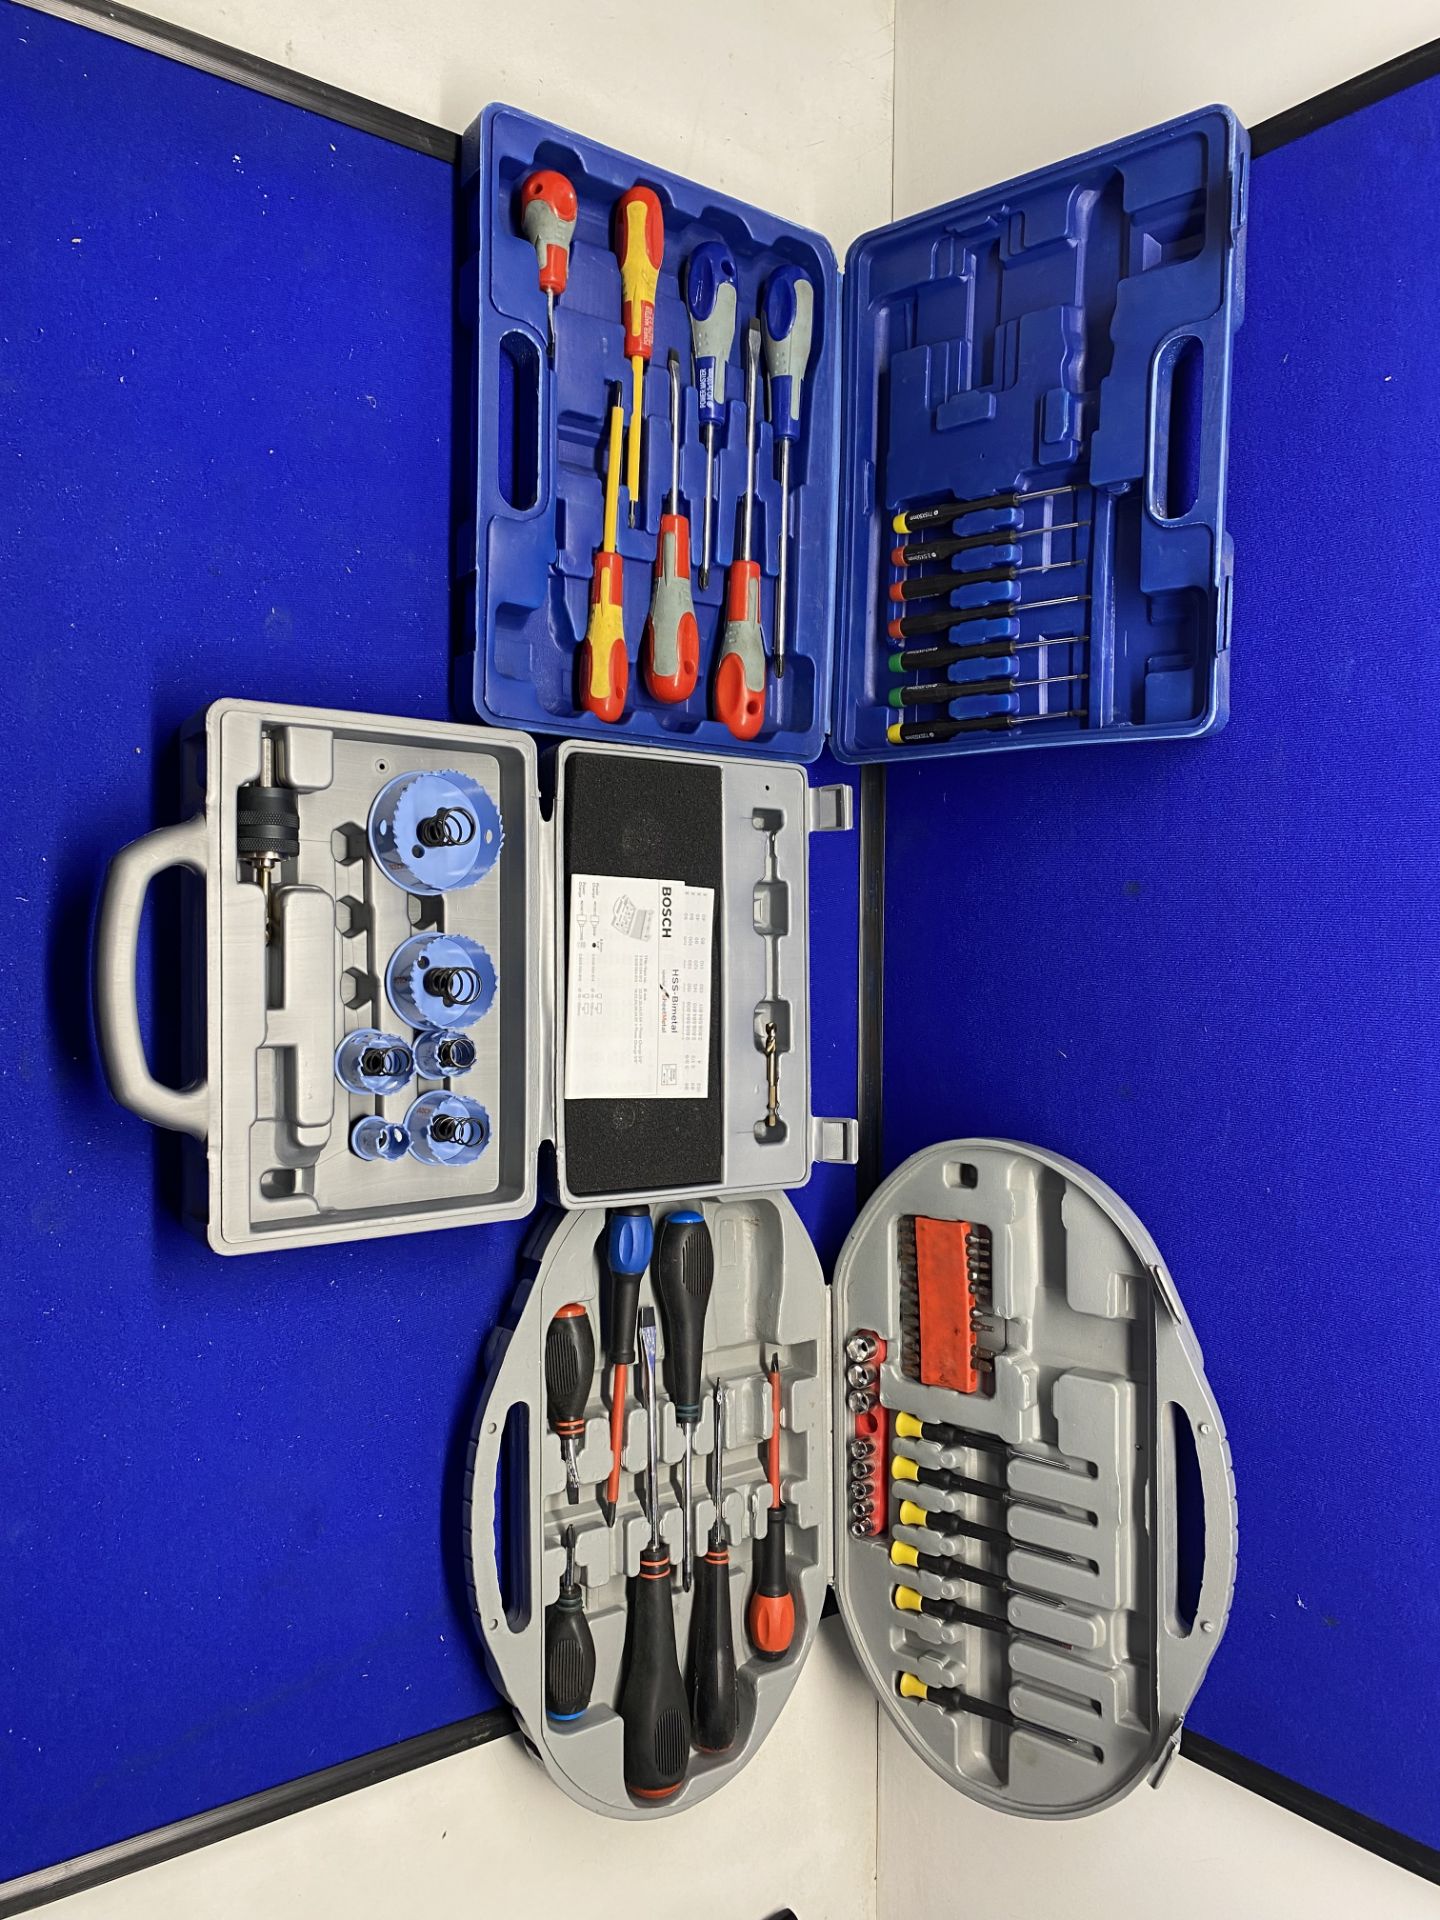 3 x Incomplete Screwdriver / Hole saw Sets As Seen In Photos